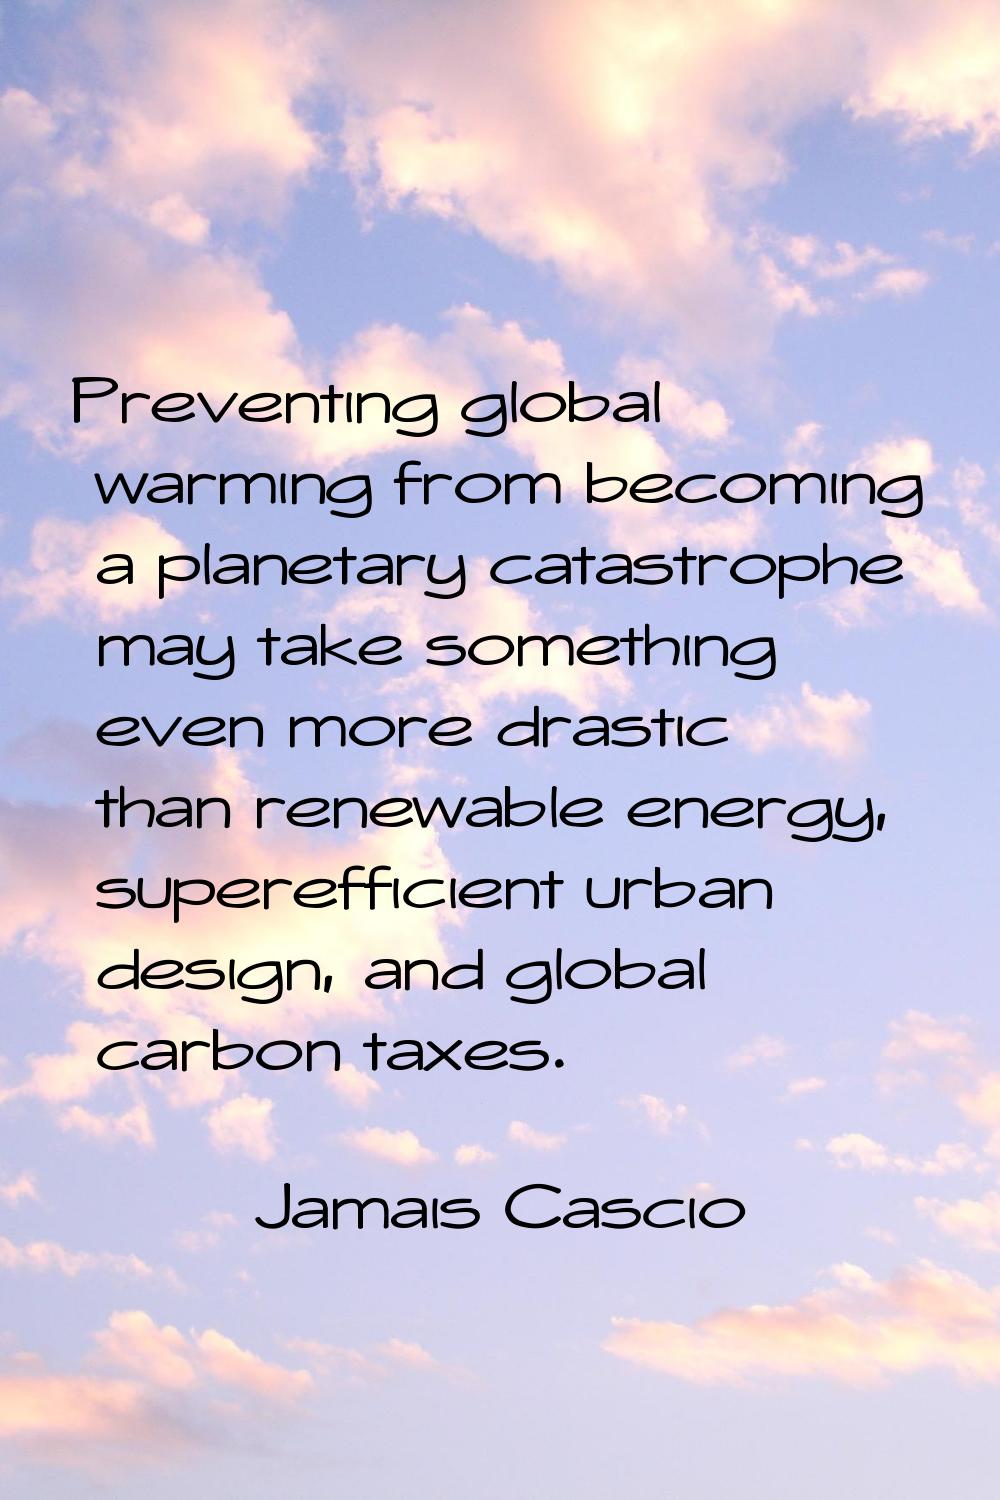 Preventing global warming from becoming a planetary catastrophe may take something even more drasti